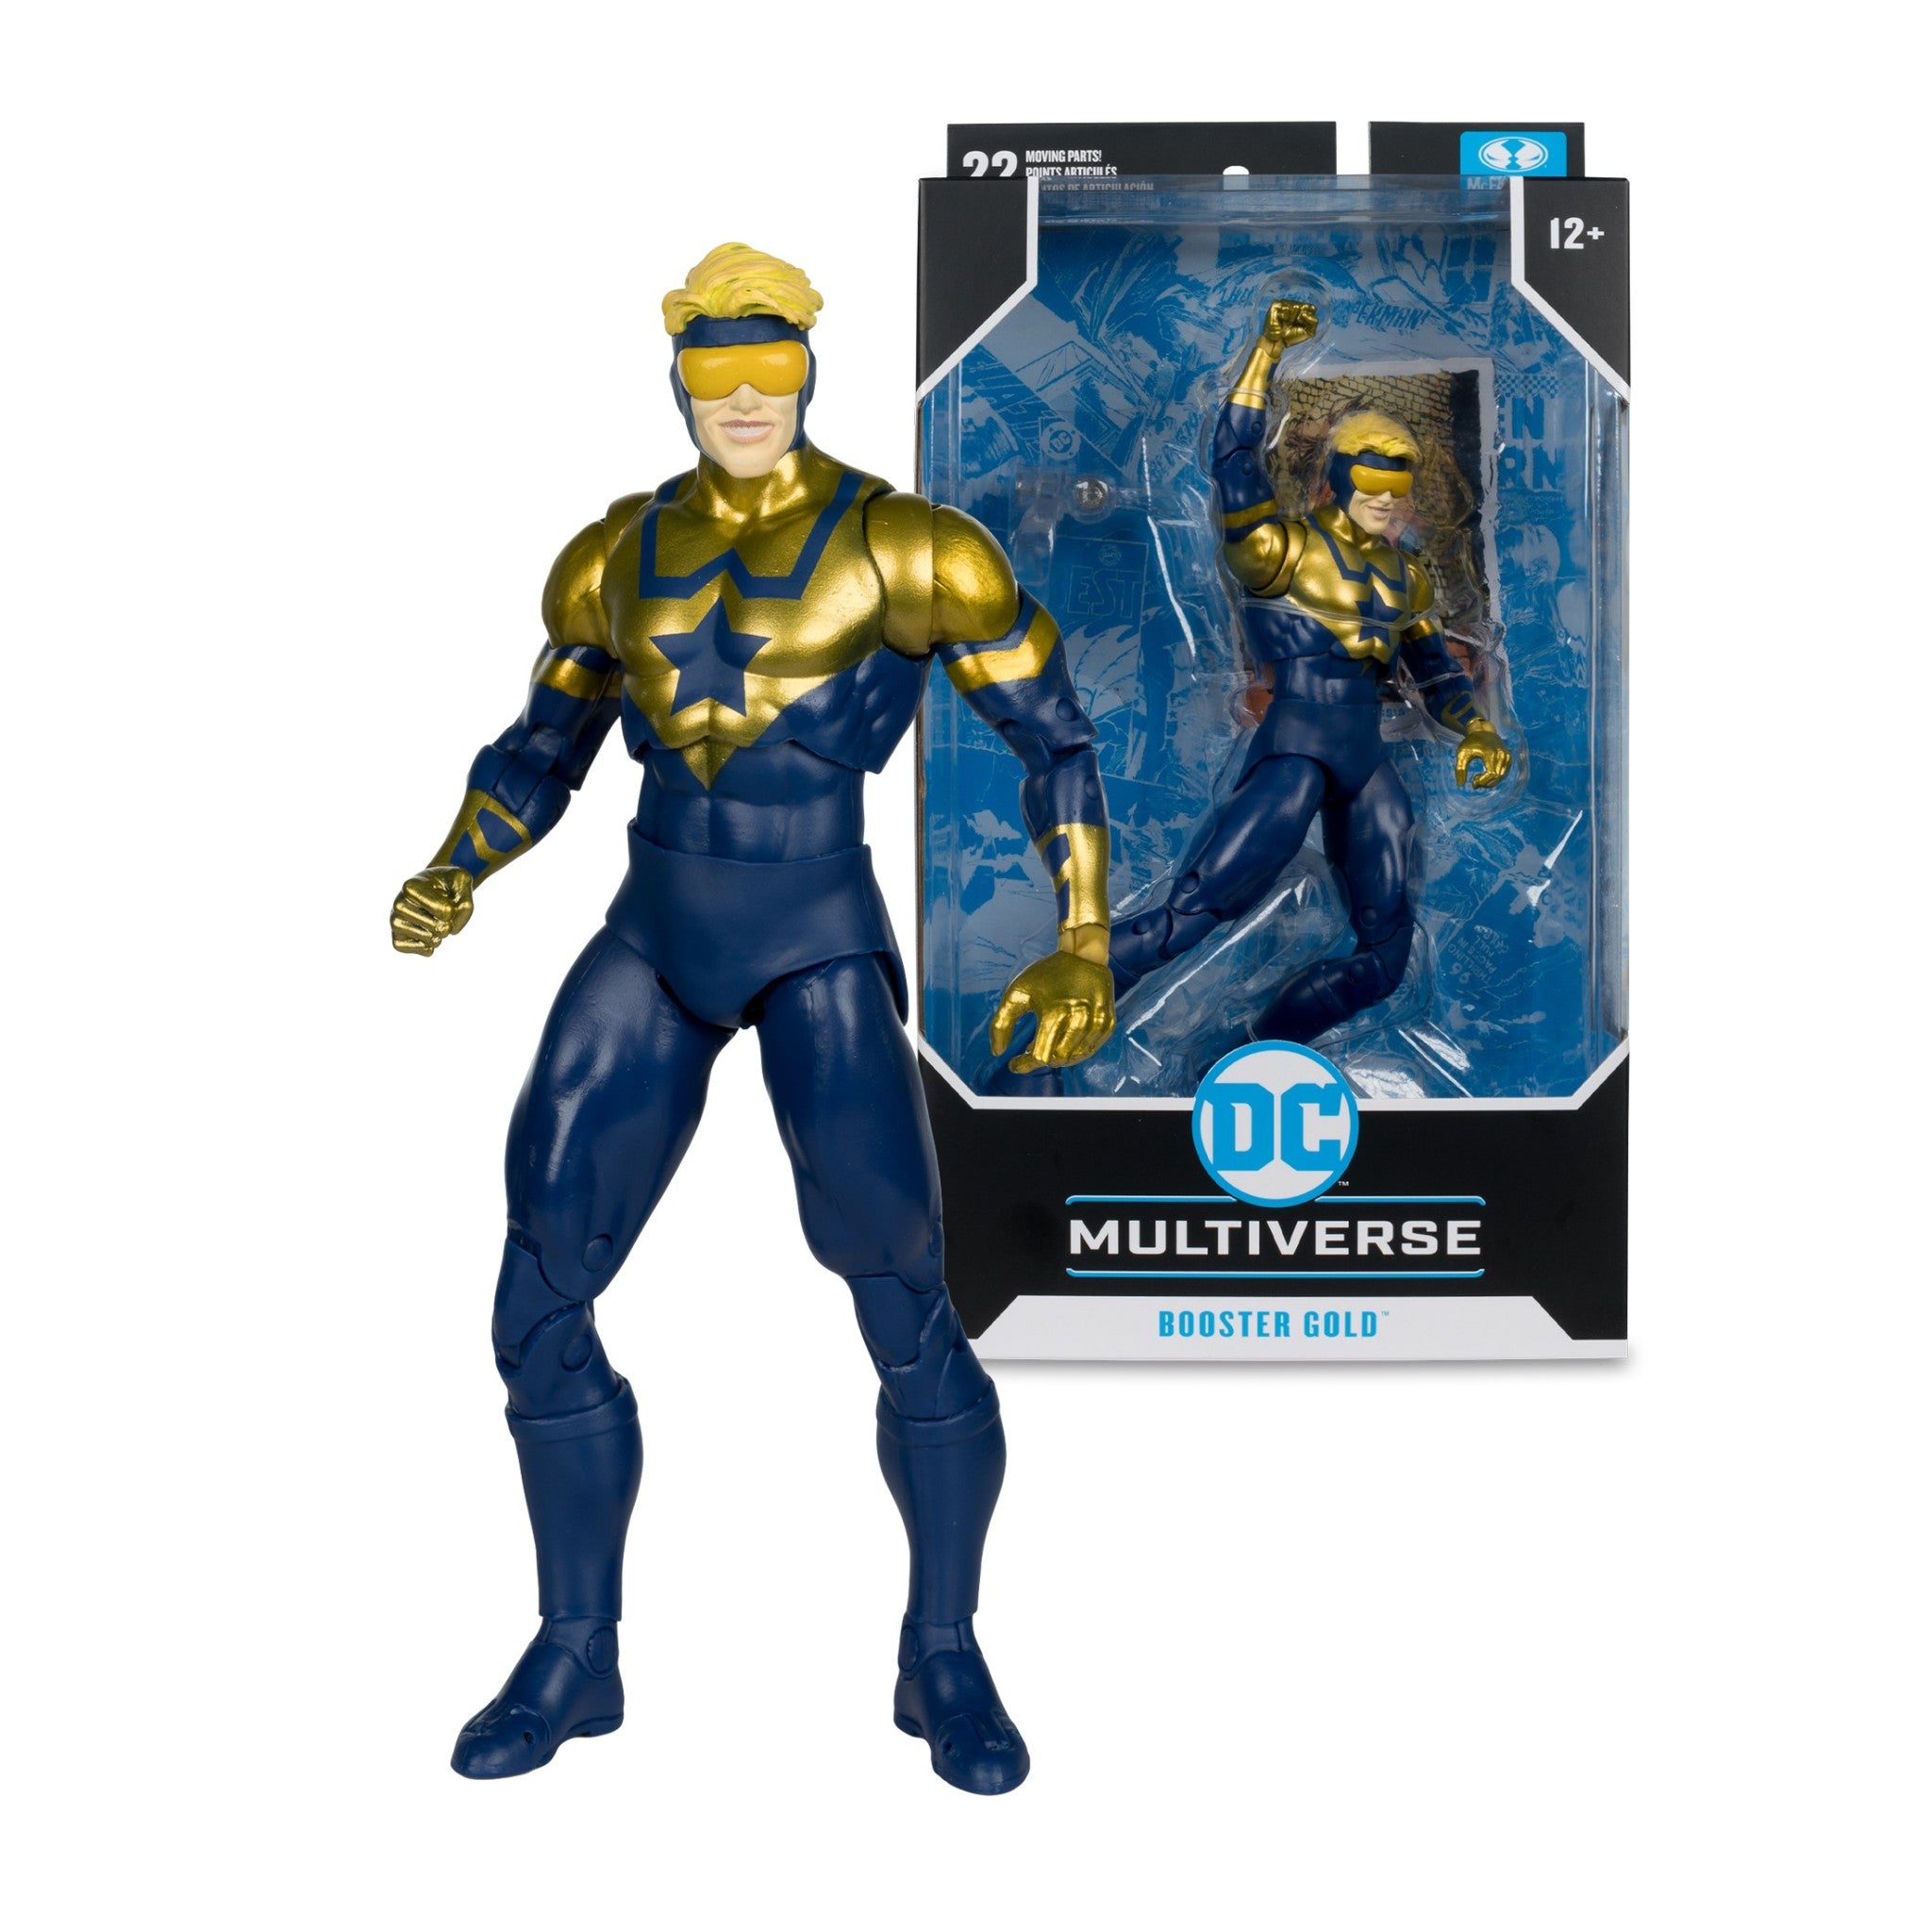 DC Multiverse Futures End Booster Gold - McFarlane Toys